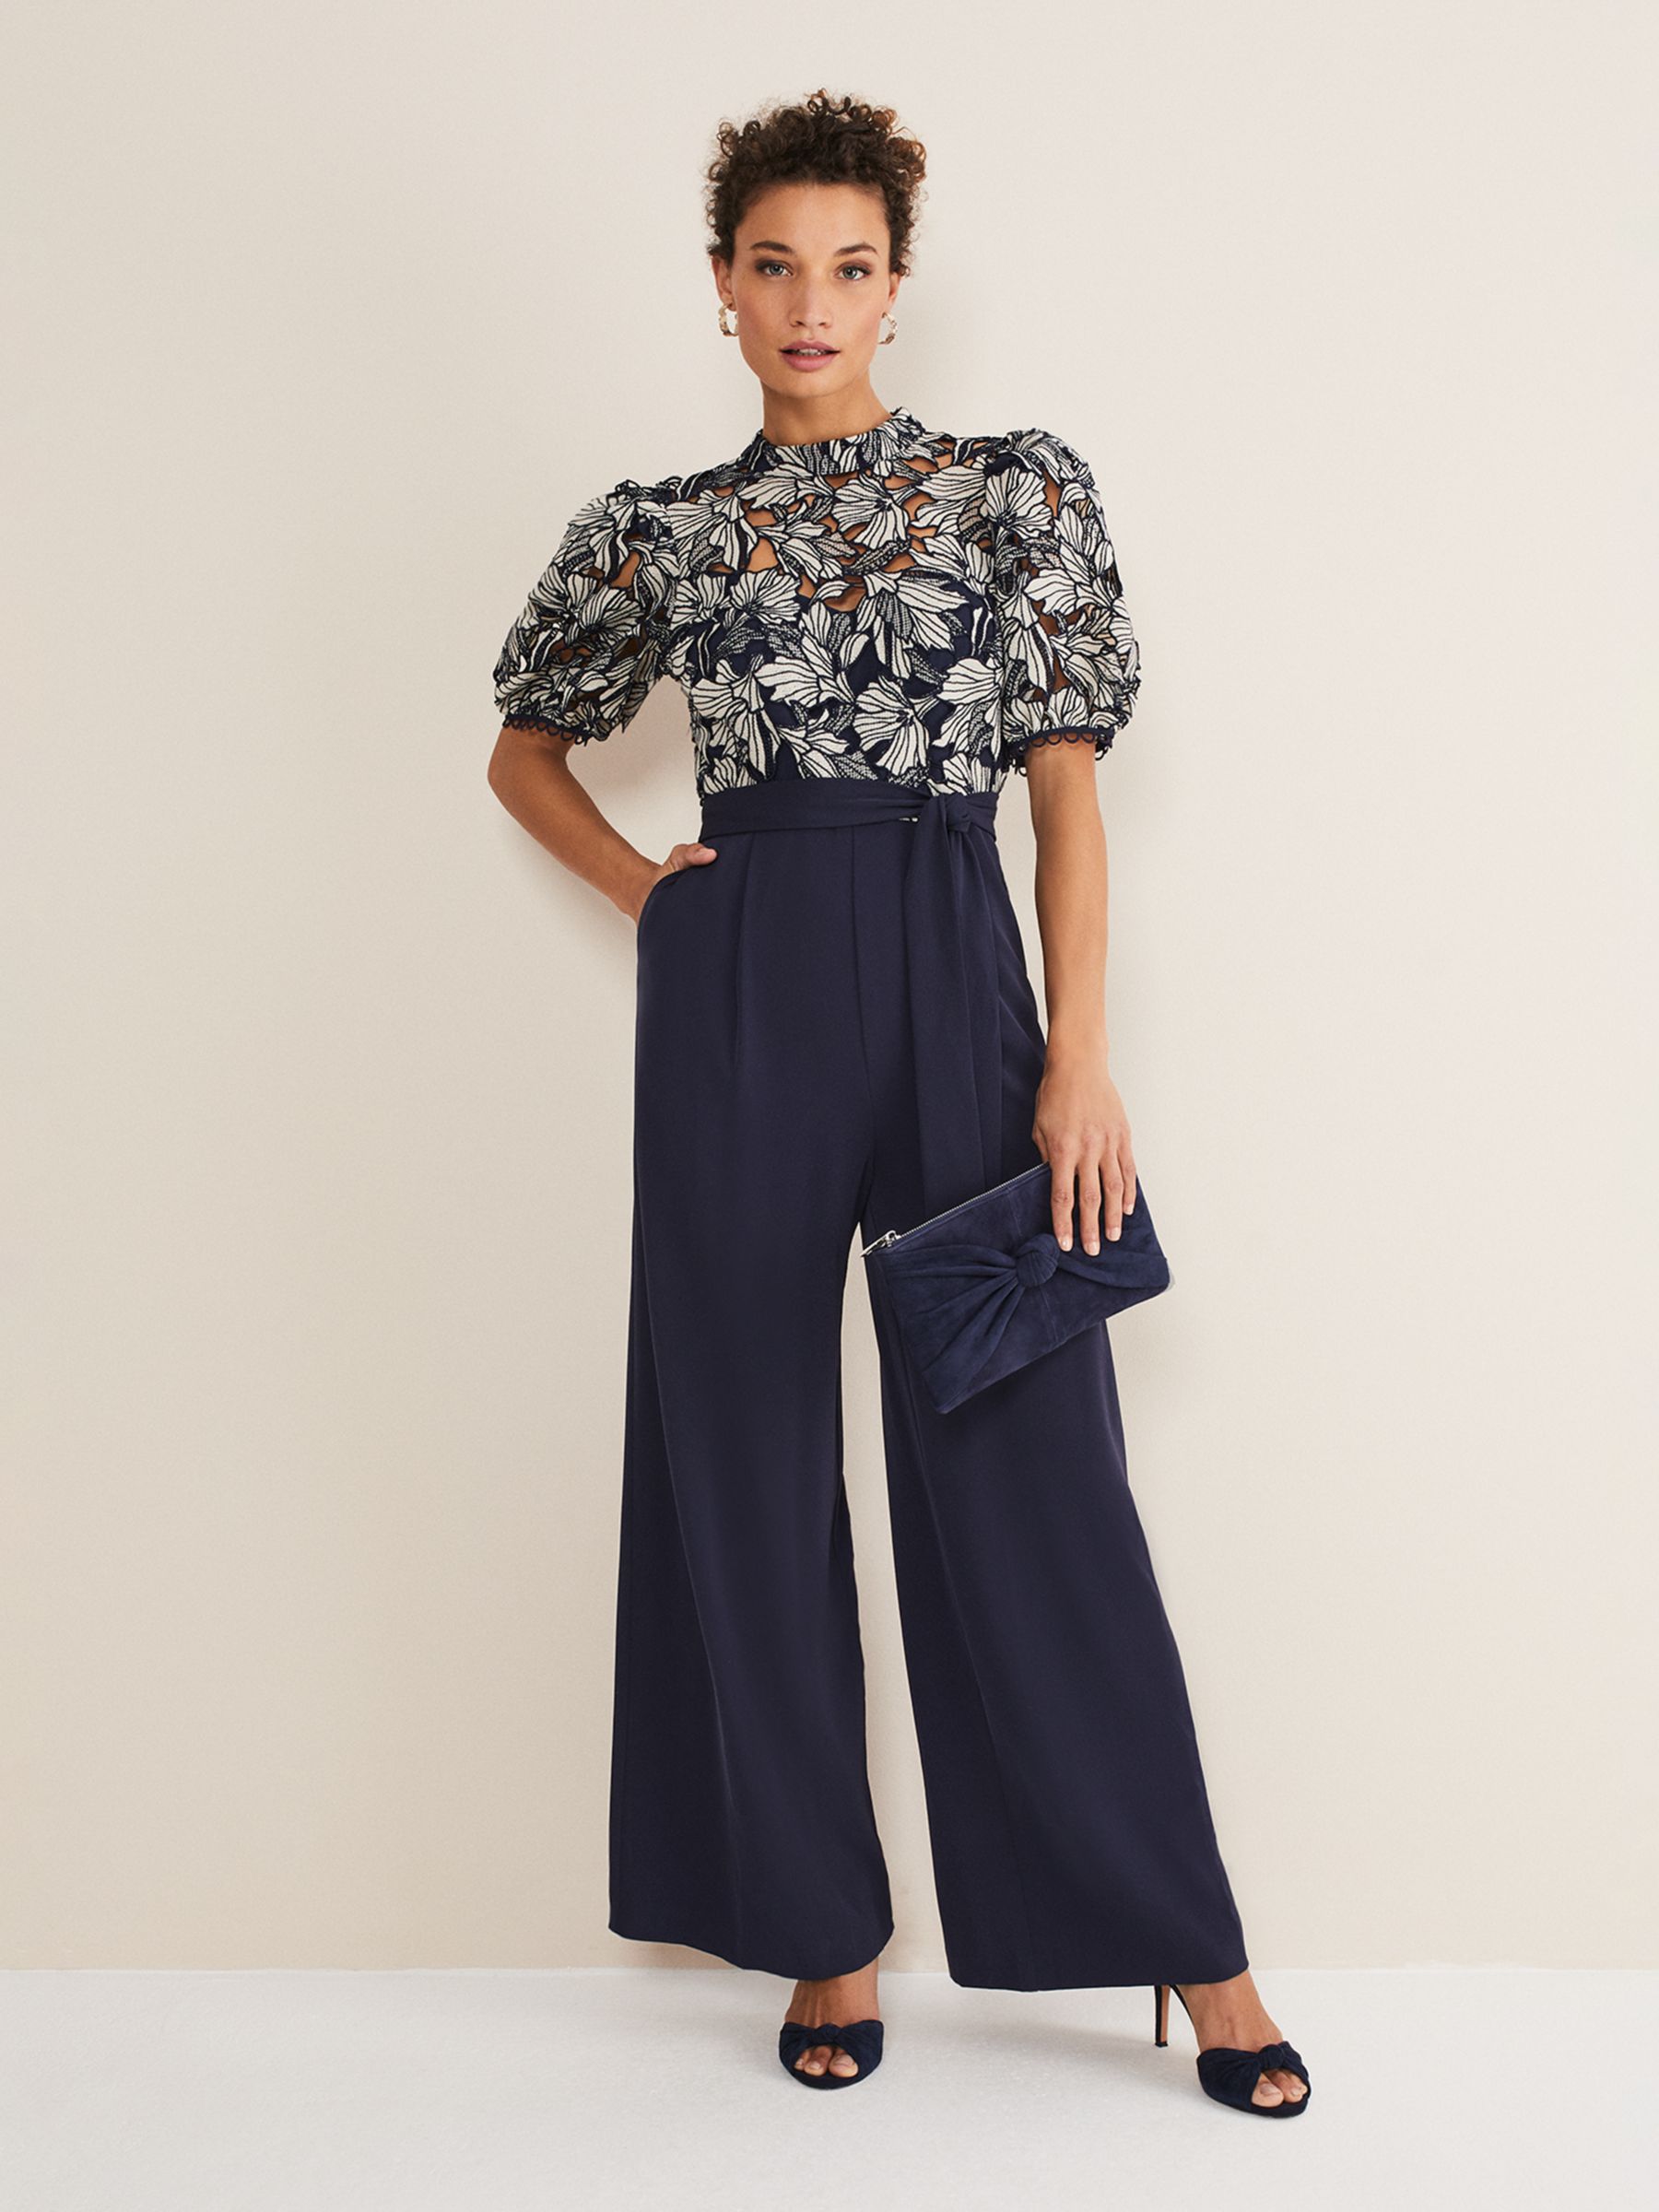 Phase Eight Caitlin Lace Bodice Wide Leg Jumpsuit, Navy/Ivory at